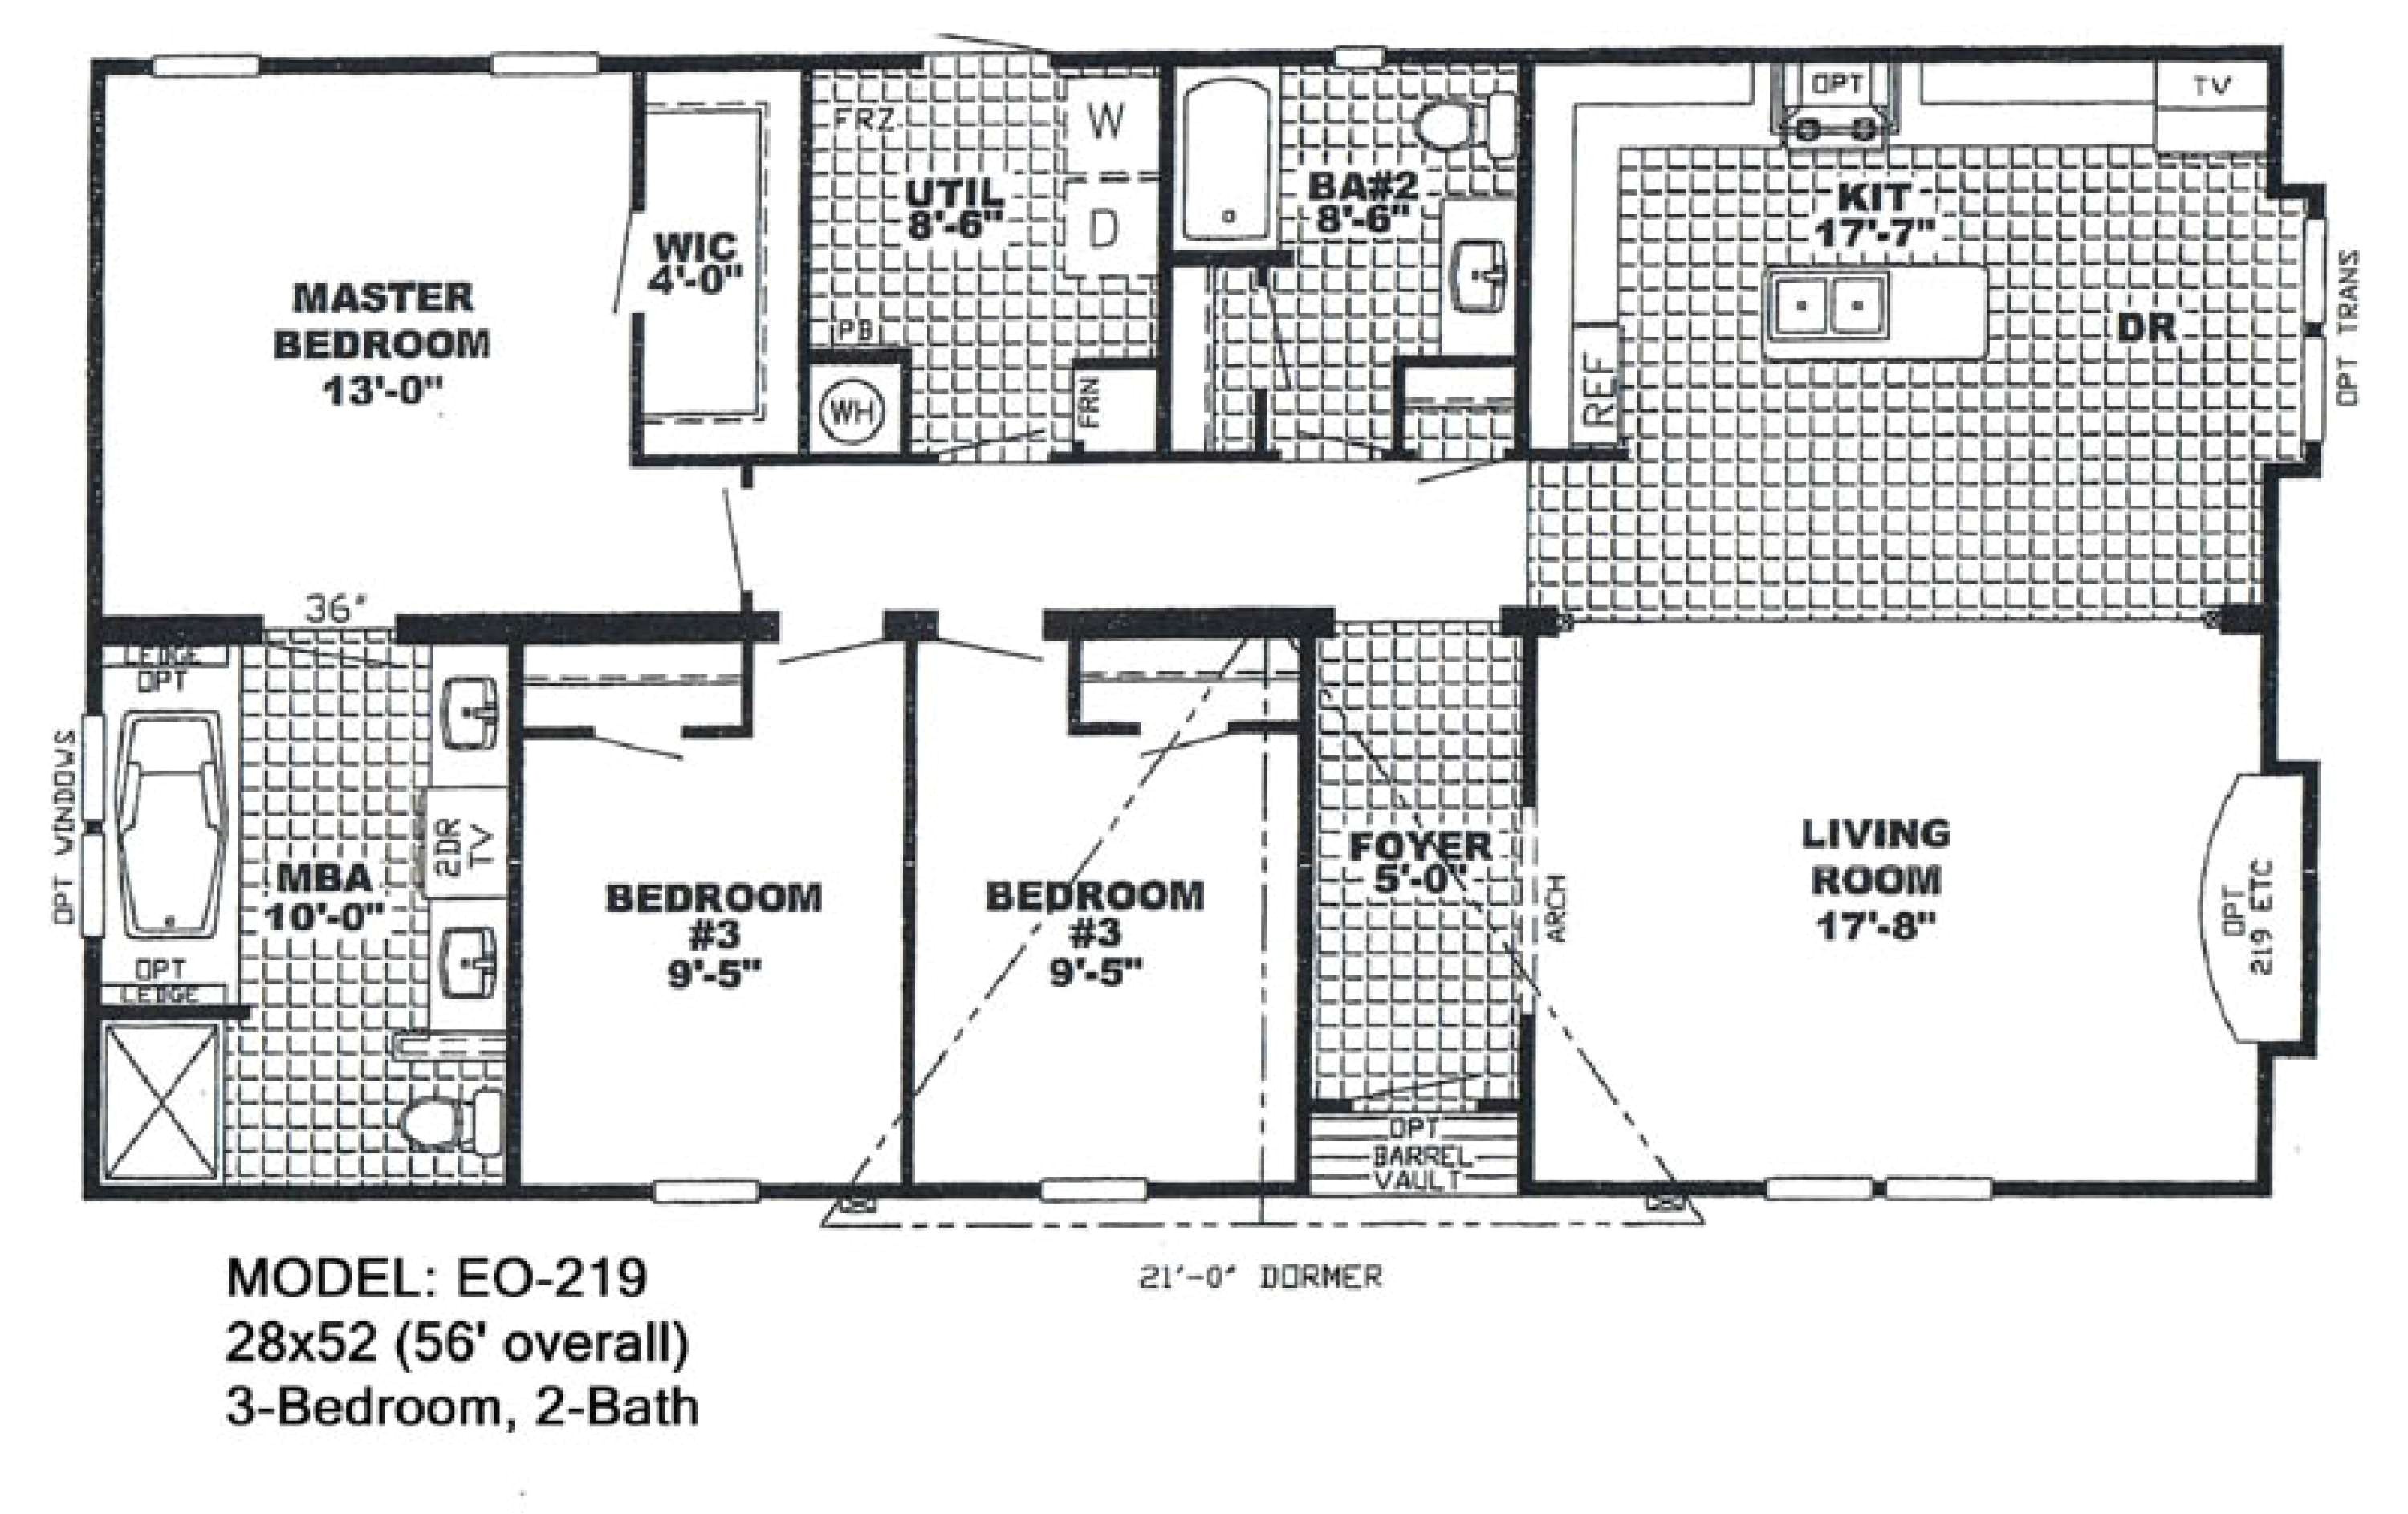 Double Wide Mobile Home Floor Plans Pictures Double Wide Mobile Home Floor Plans Also 4 Bedroom